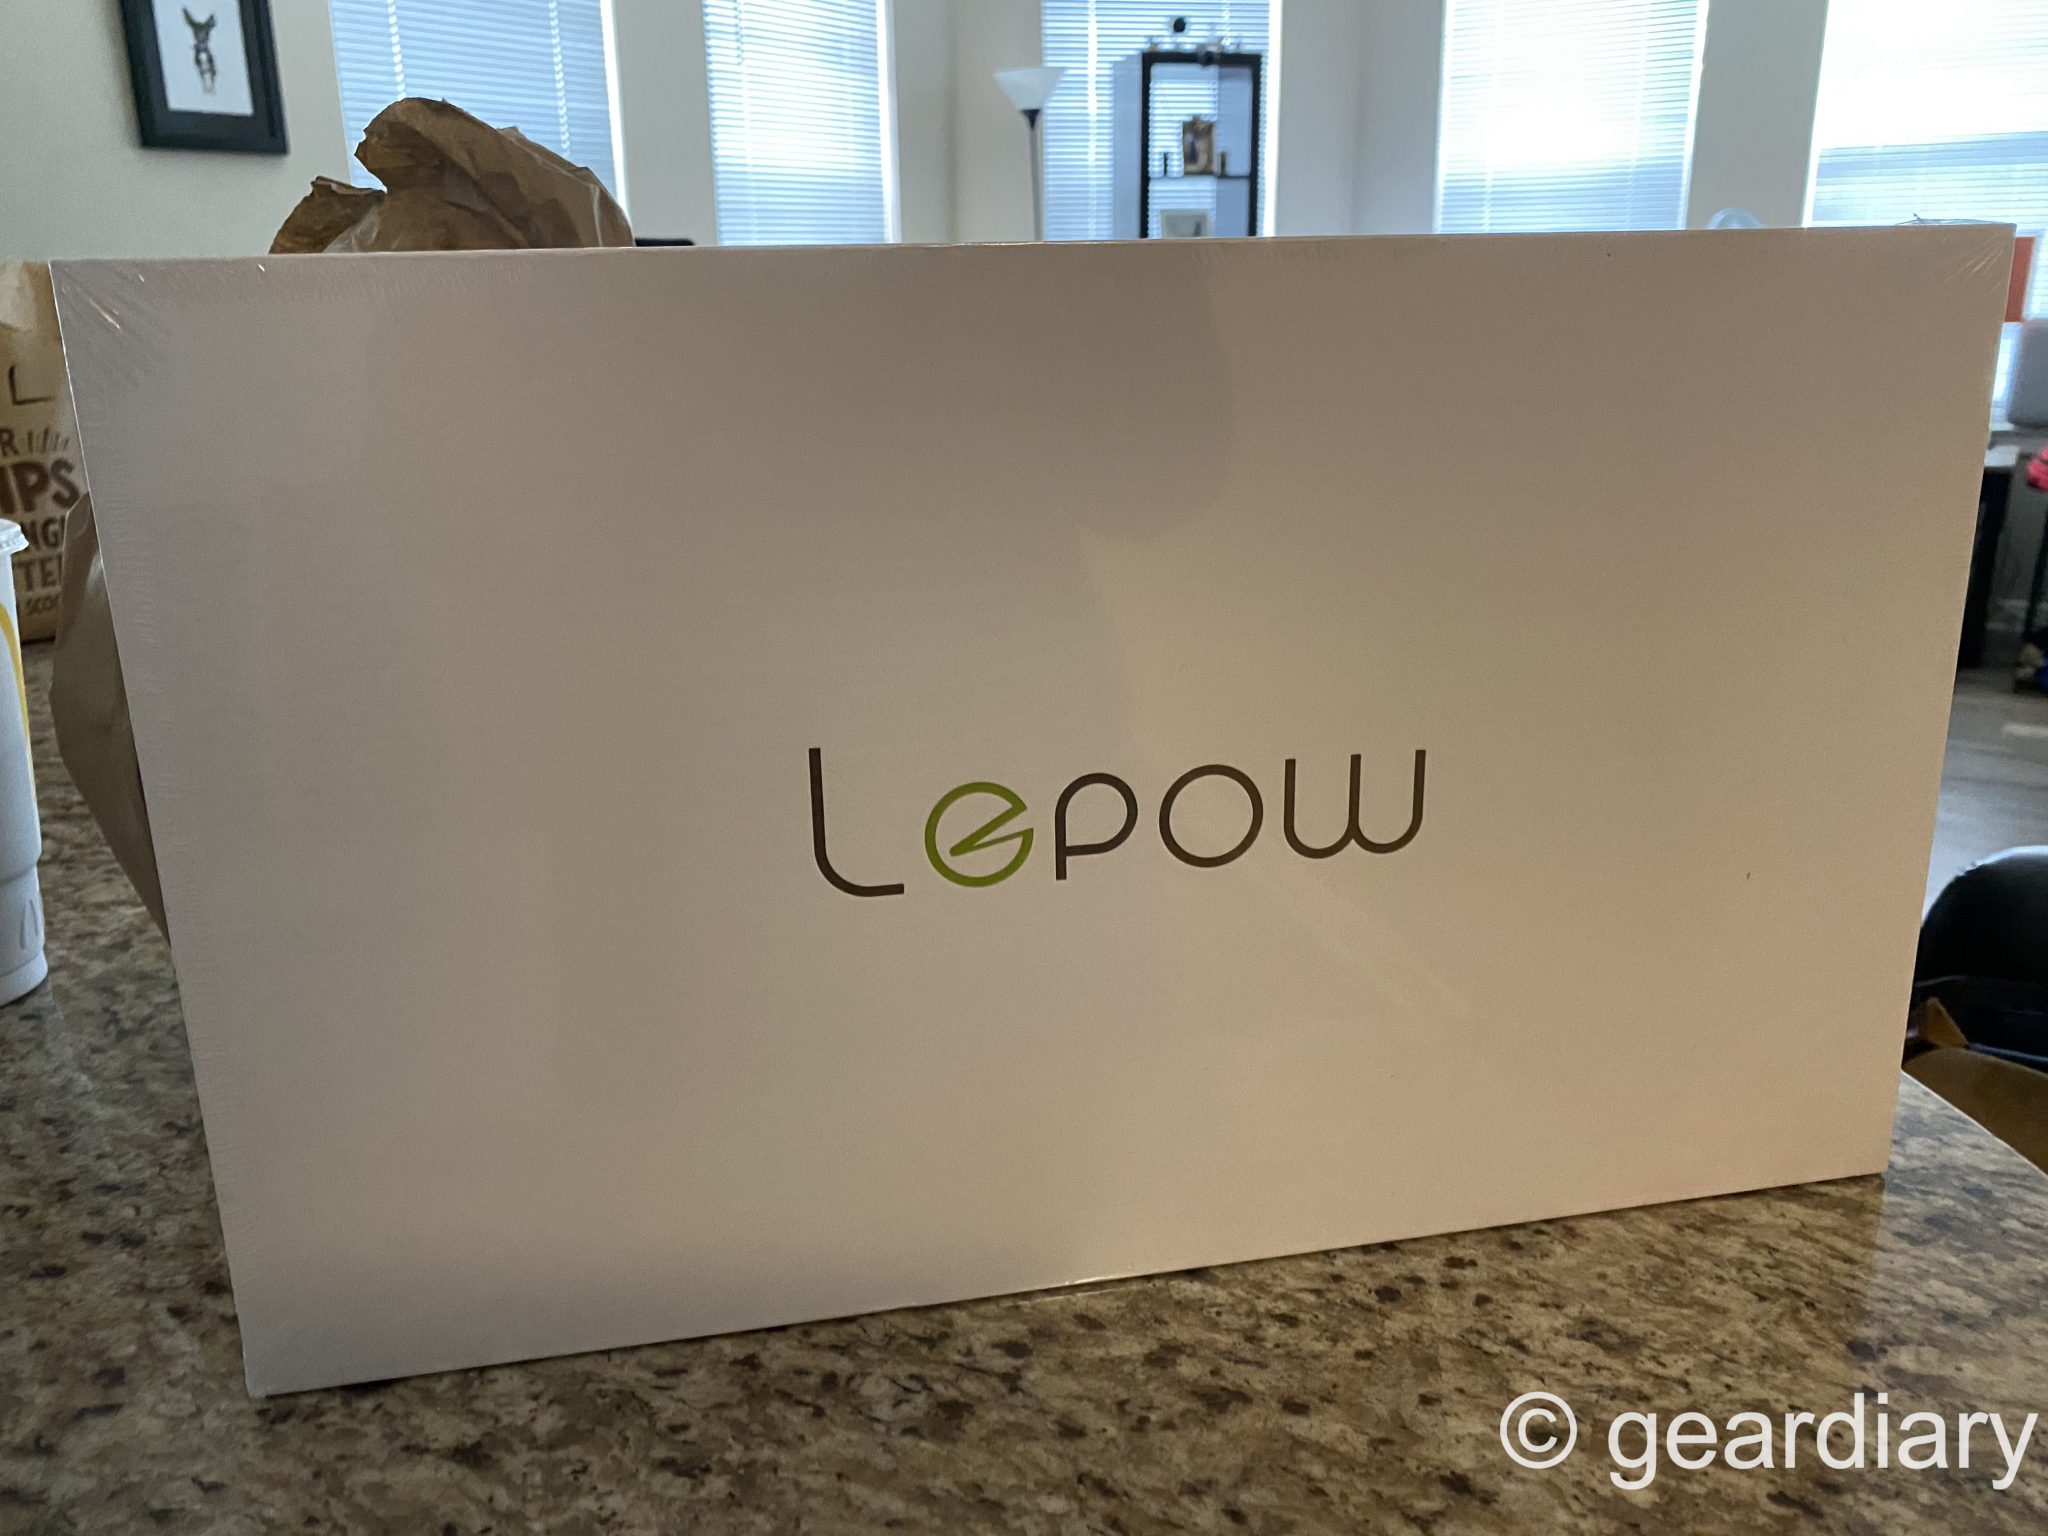 The 15.6″ Lepow Portable Monitor Is a WFH Must-Have